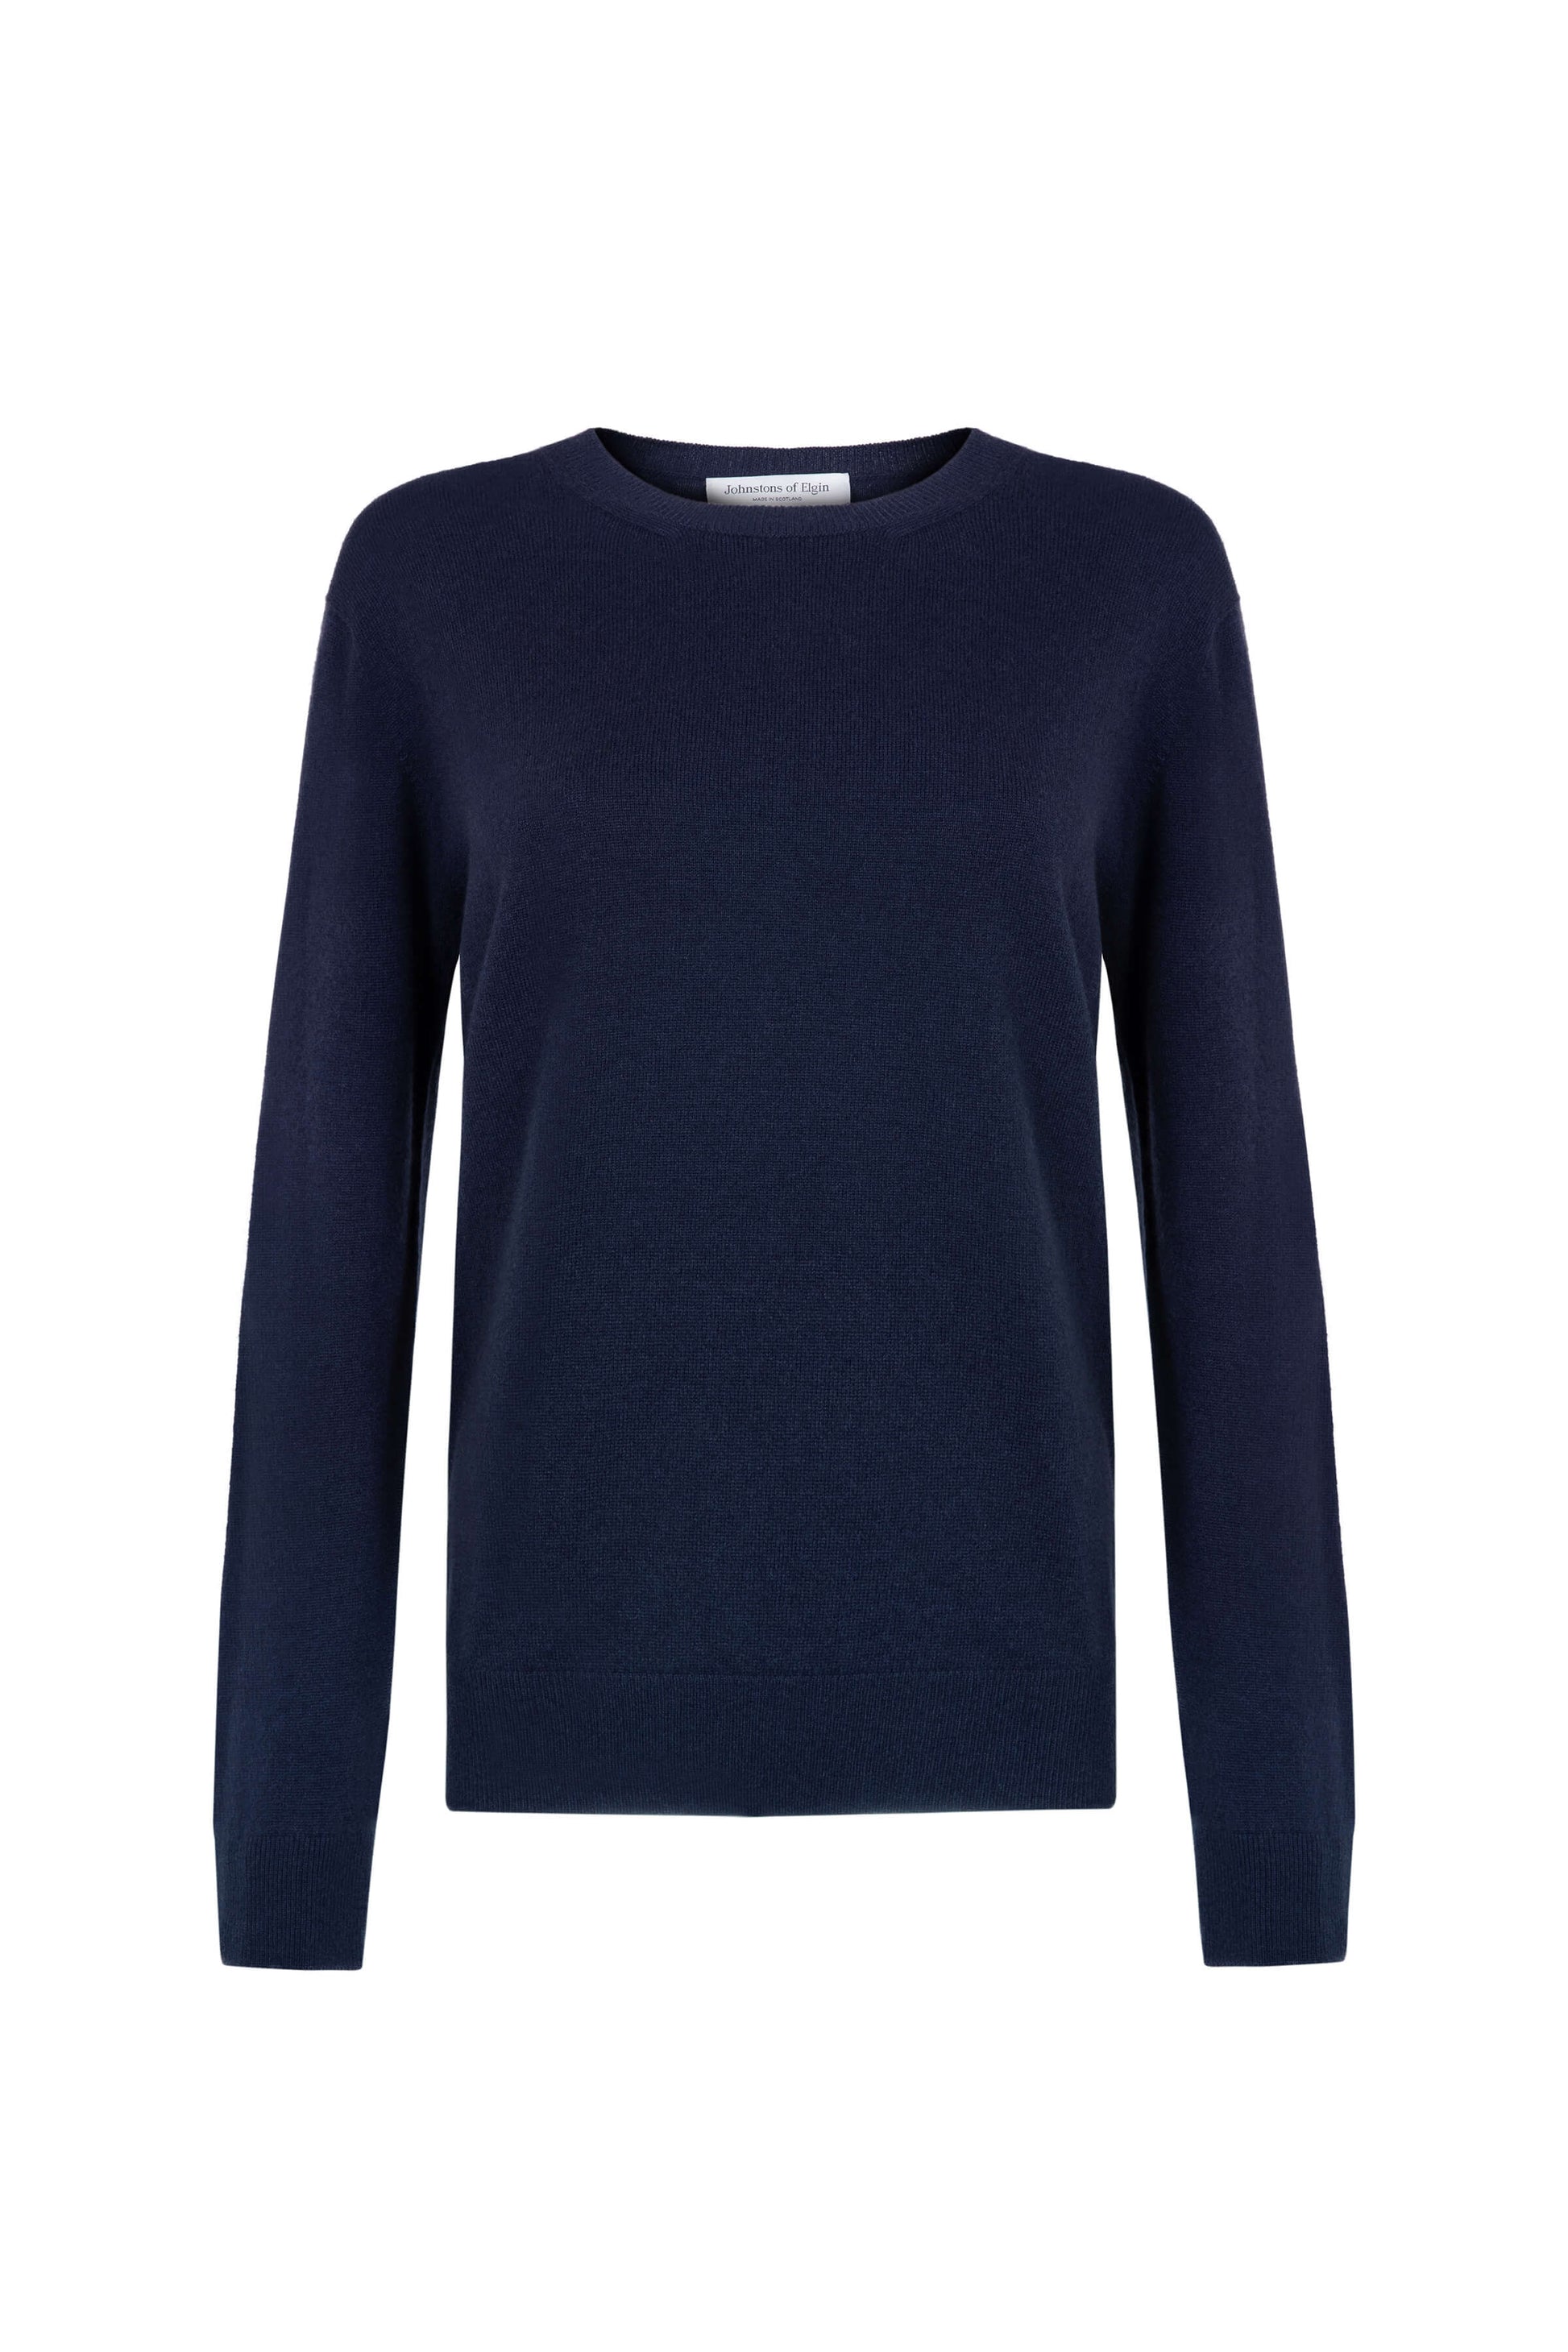 Johnstons of Elgin Womens Knitwear Navy Blue Classic Cashmere Crew Neck KAI05139SD0707